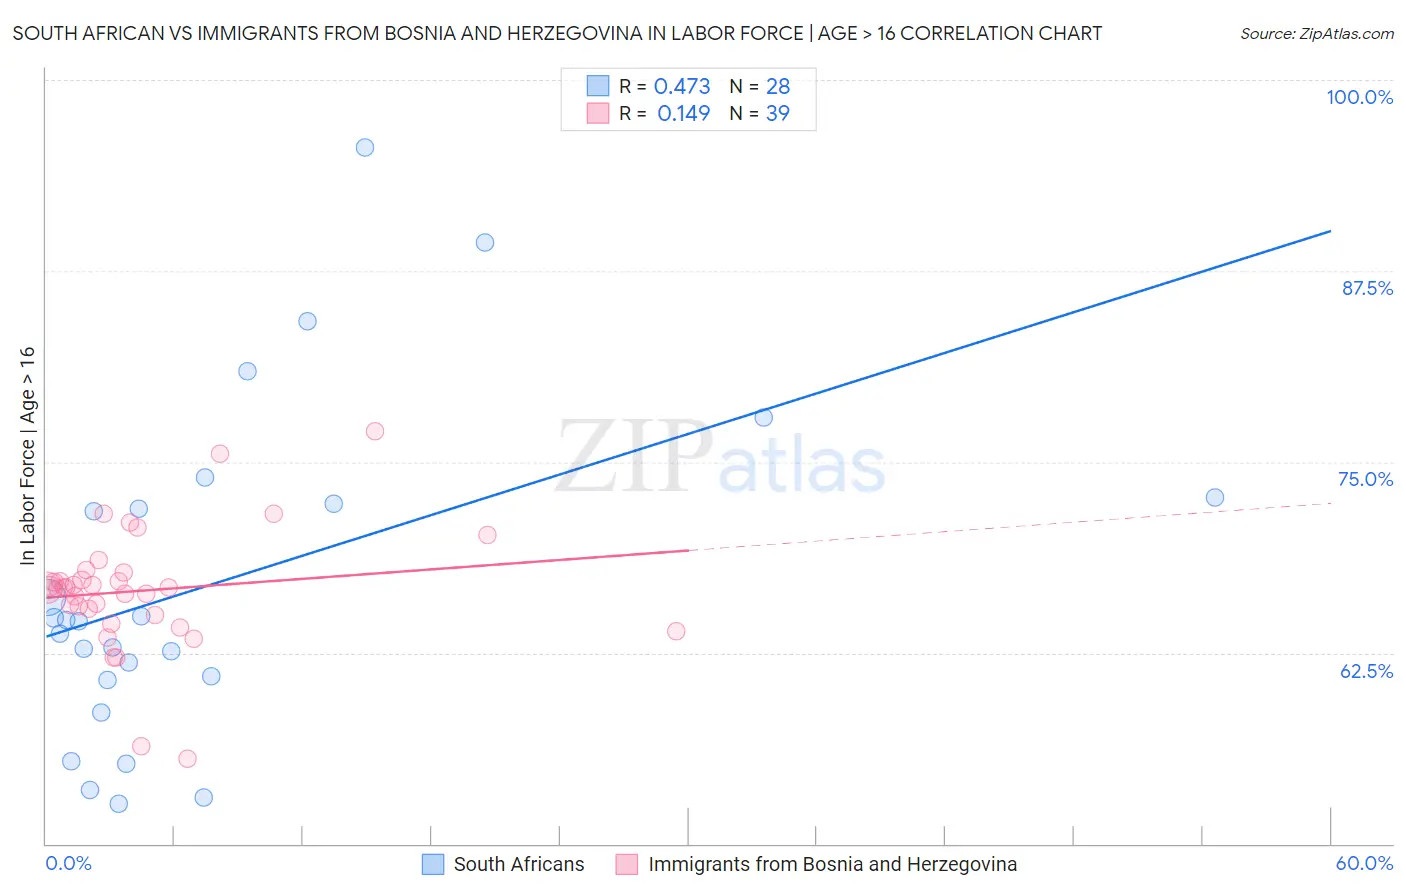 South African vs Immigrants from Bosnia and Herzegovina In Labor Force | Age > 16